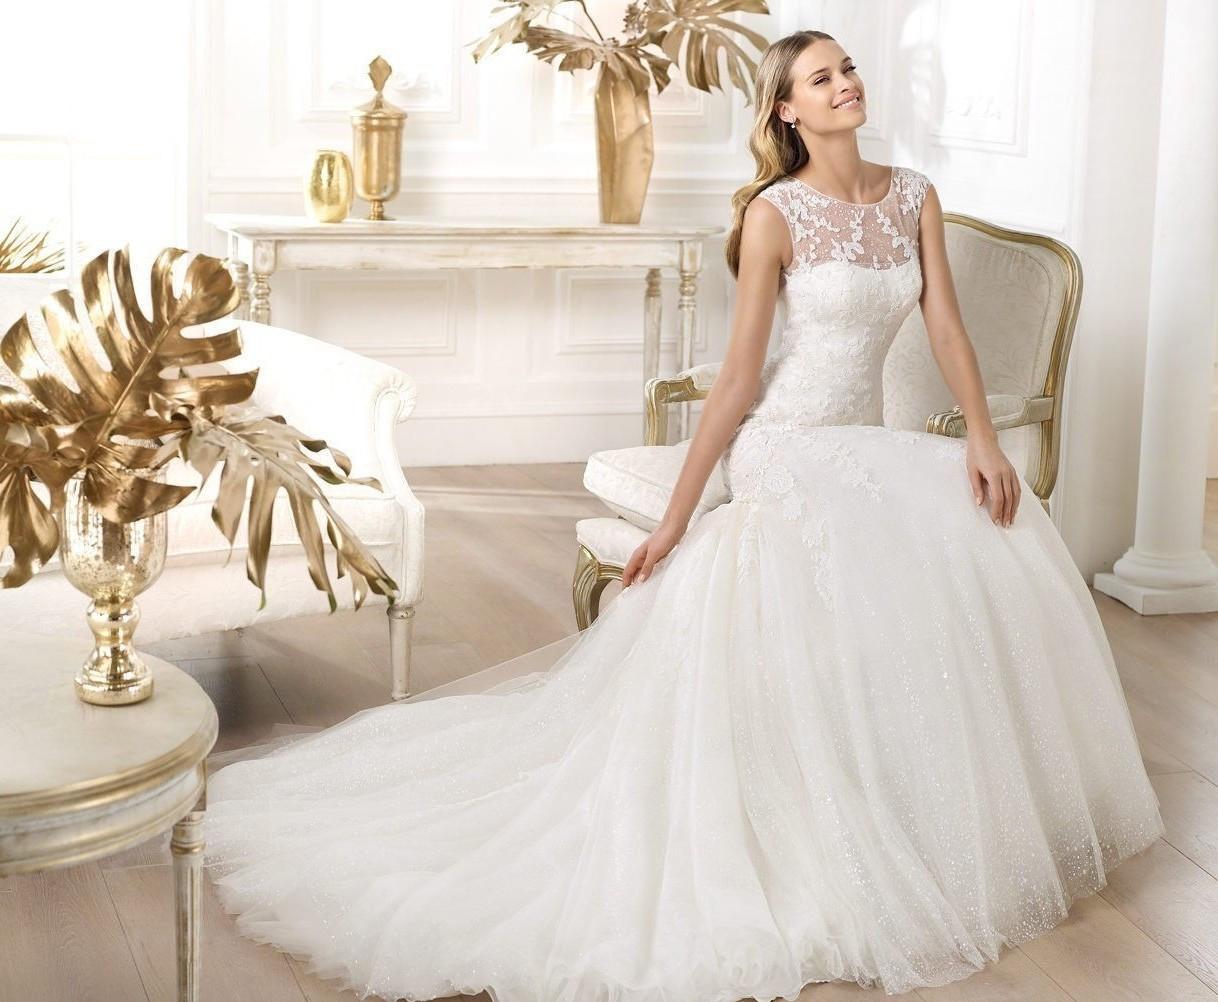 Wedding Gown Rentals
 Rent Your Dream Wedding Dress With Perfect Fit And